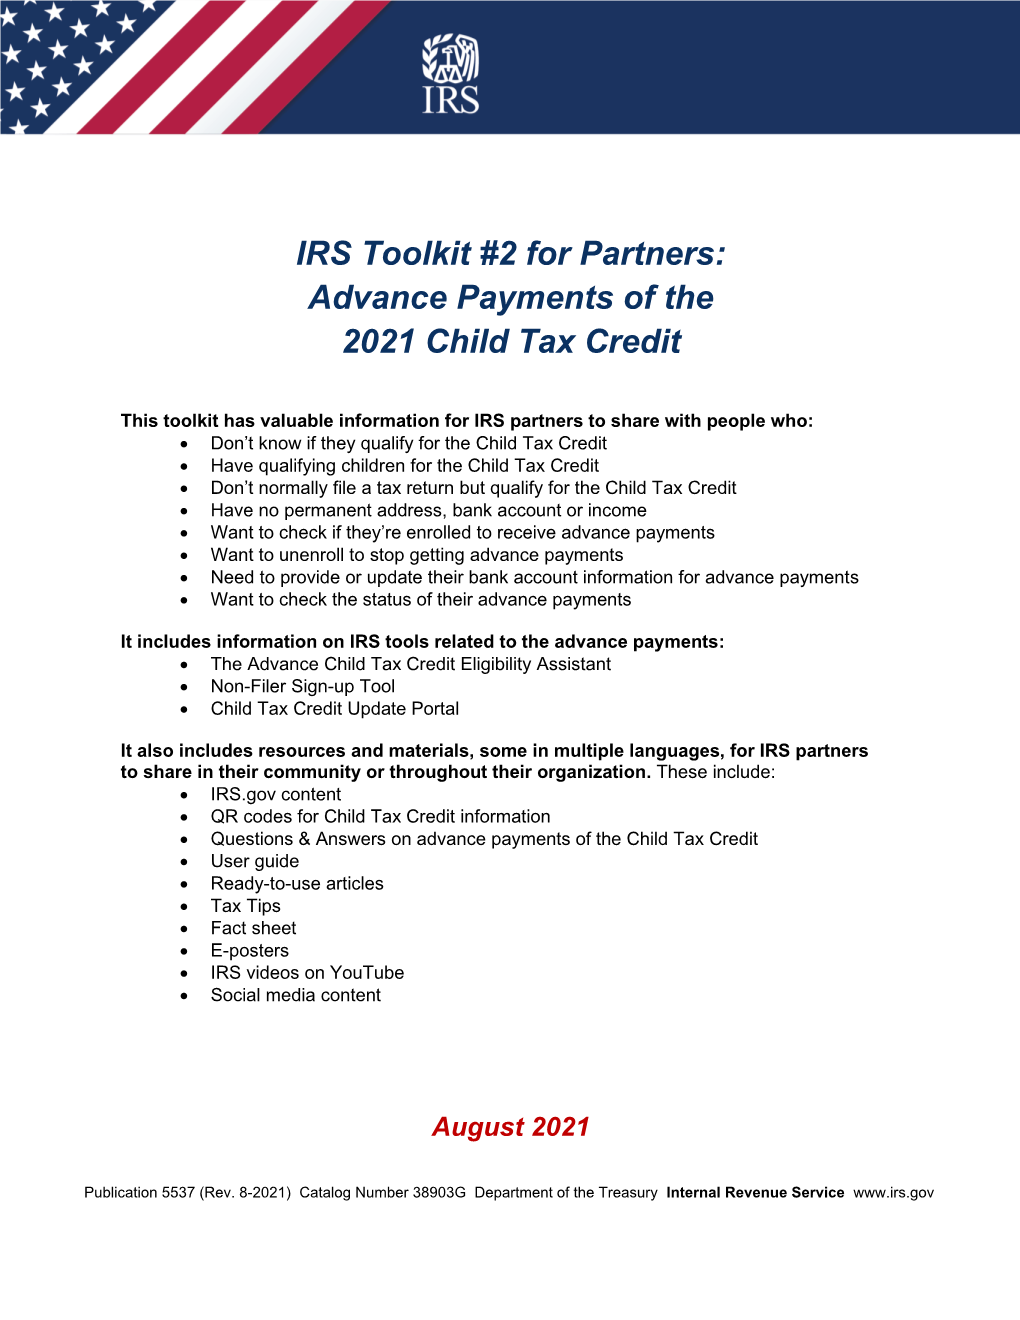 IRS Toolkit for Partners: Advance Payments of Child Tax Credit